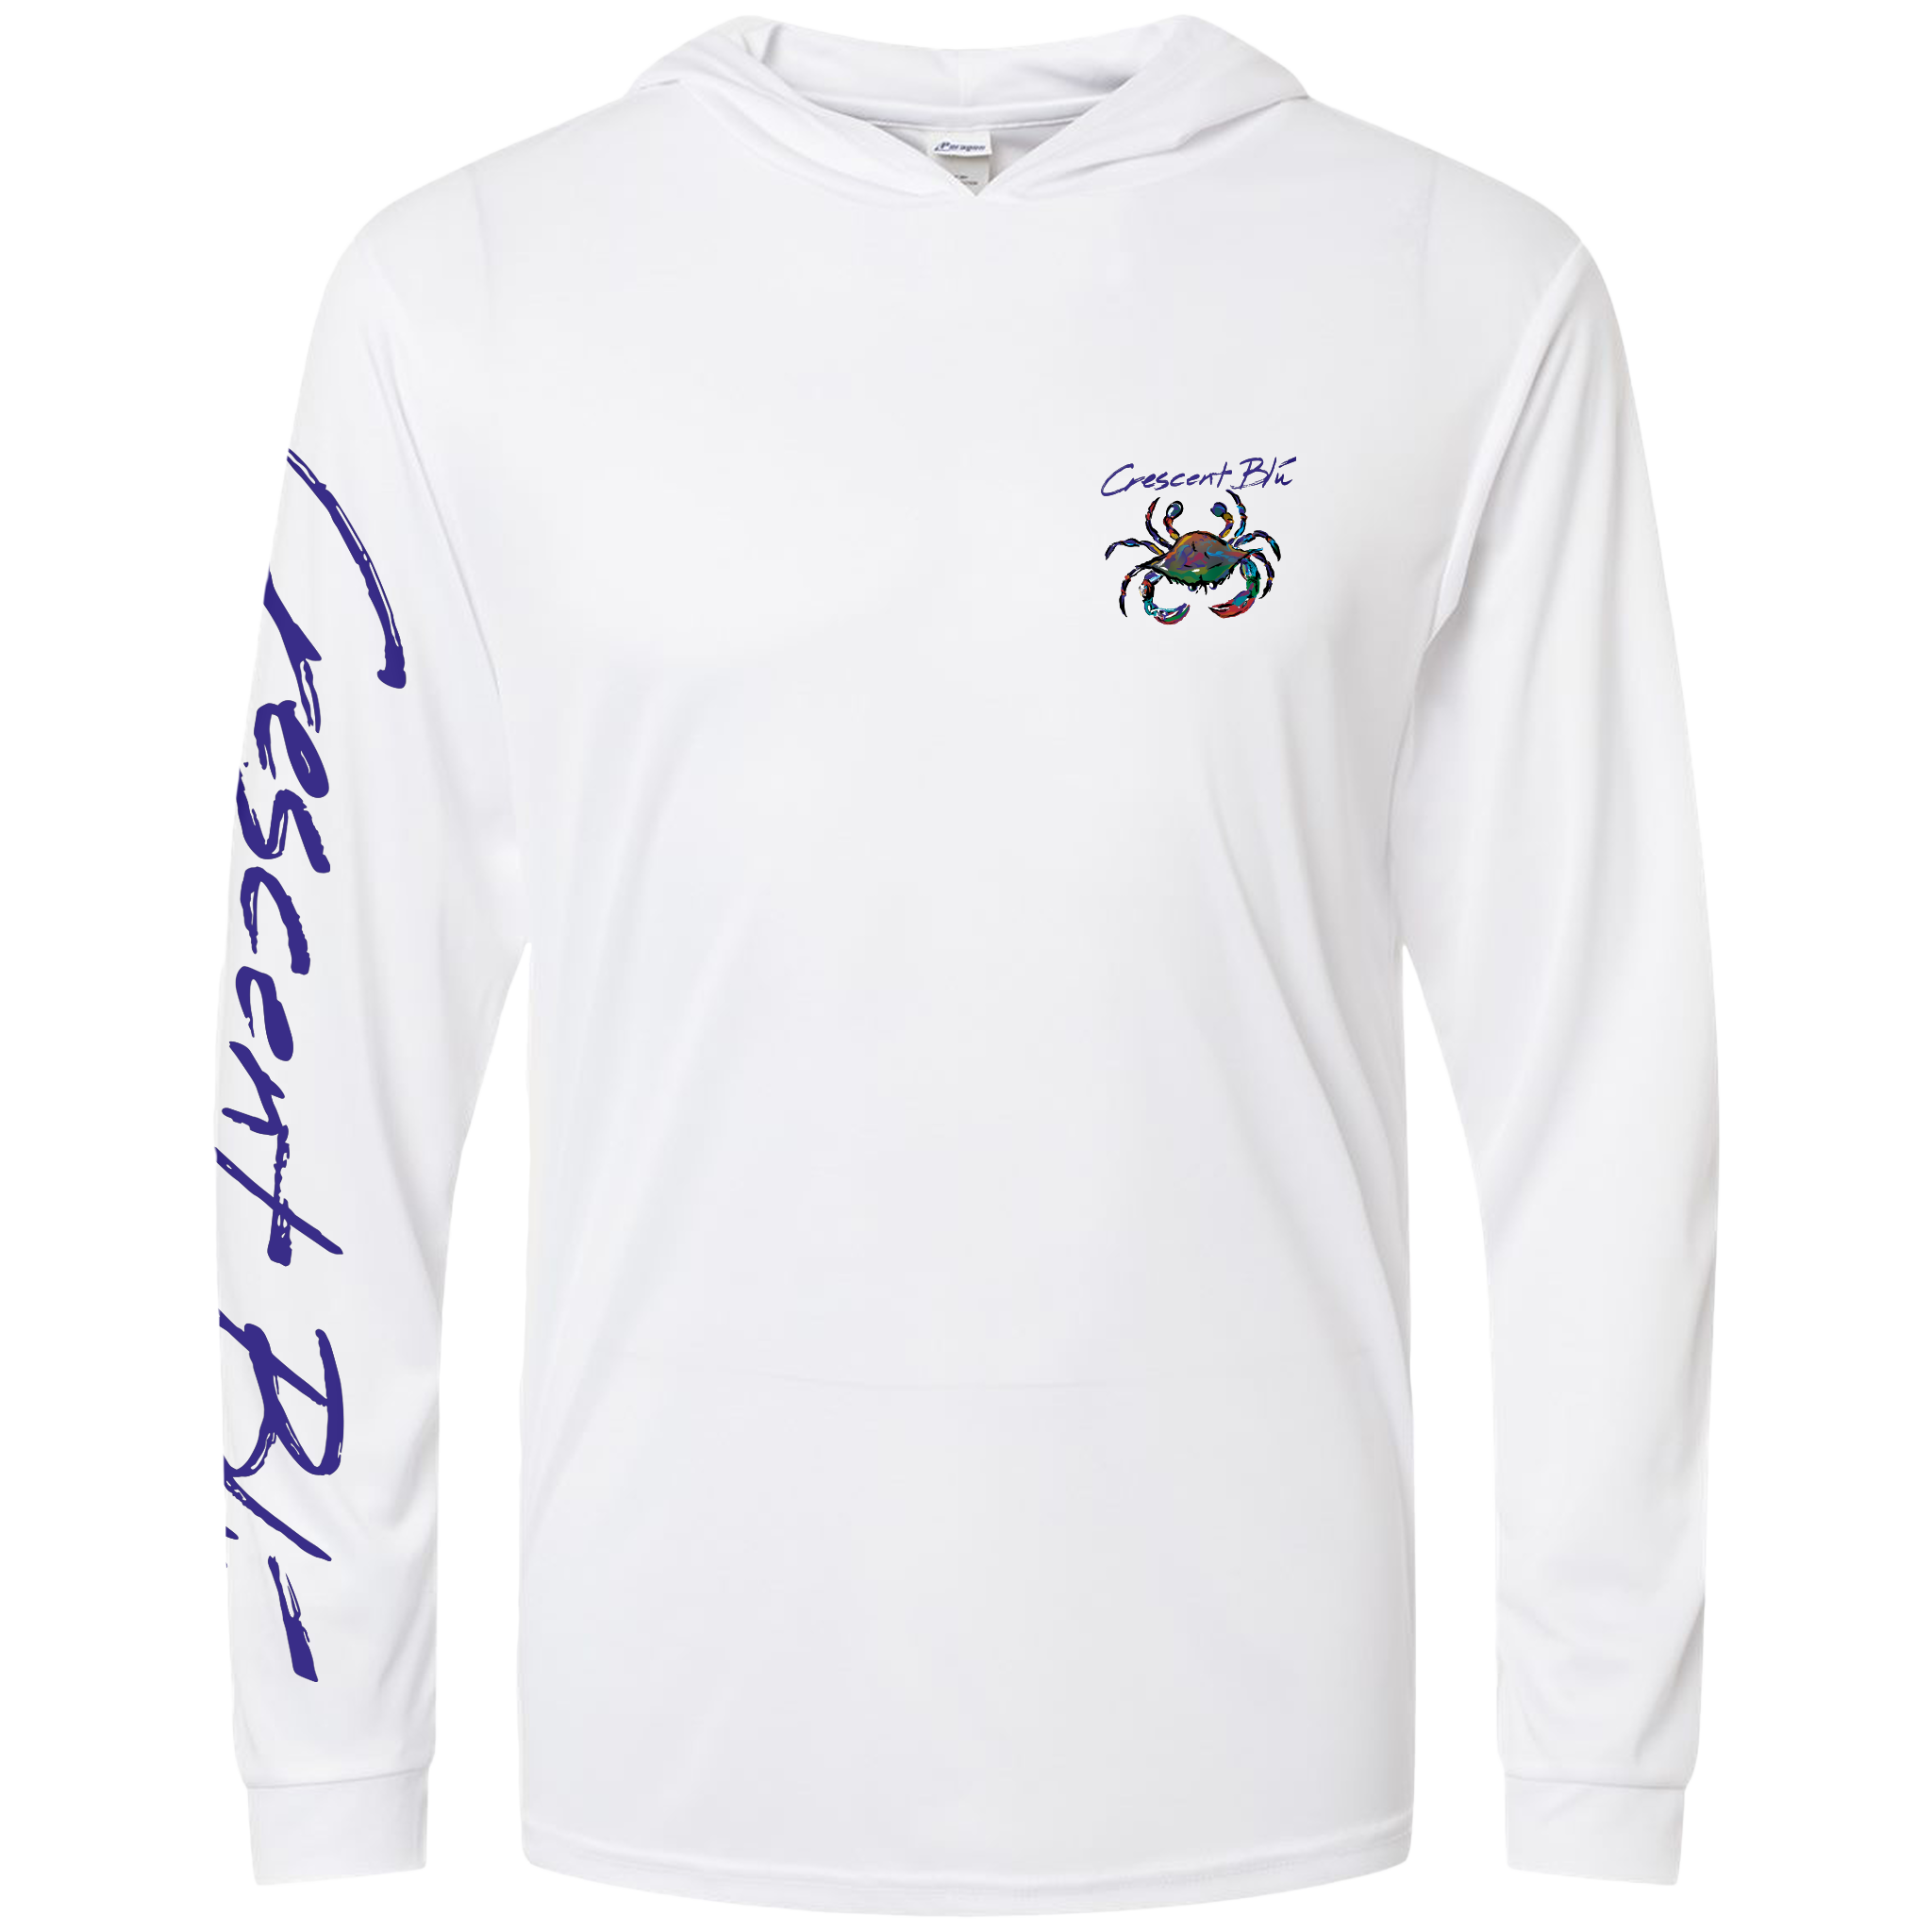 View of the front of an adult long sleeve Performance Sun shirt with Hoodie. UPF 50+. Crescent Blu printed along the length of the right sleeve. Multi-colored Crescent Blu logo printed on the left upper chest